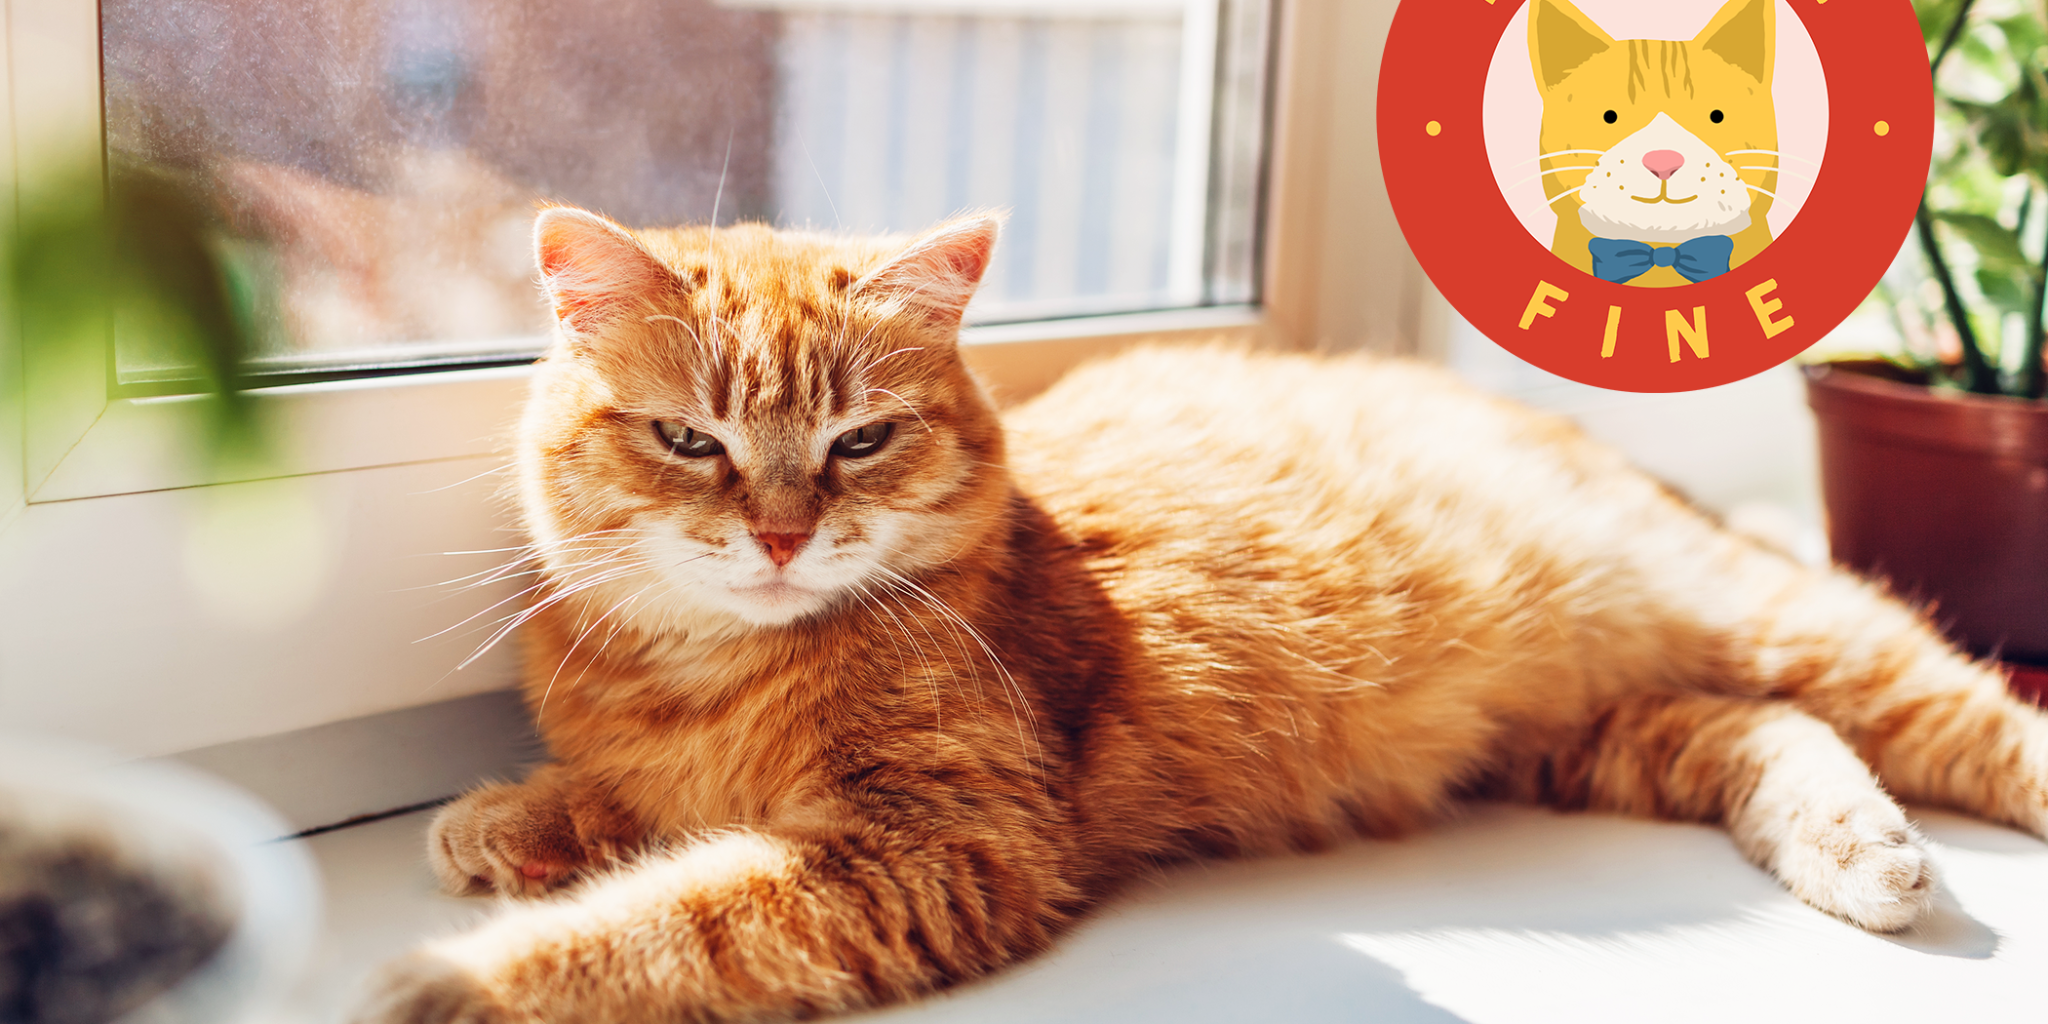 Cats Can Get Sunburns, But Here's How to Prevent It